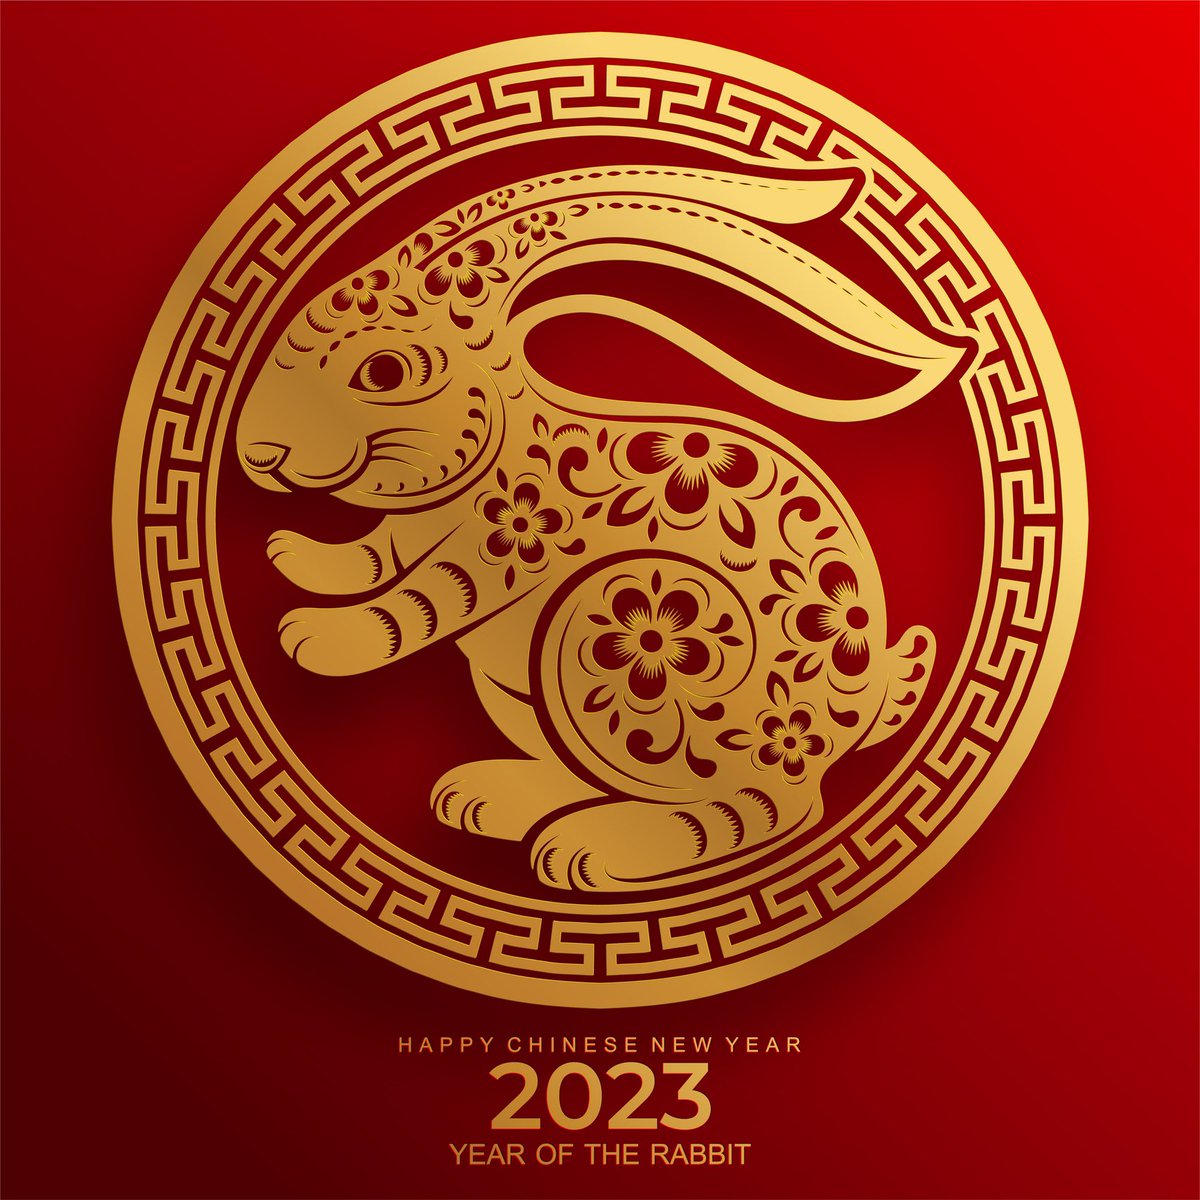 Happy Lunar New Year! Wishing all who celebrate in a very happy and prosperous Year of the Rabbit. #lunarnewyear #yearoftherabbit #licf #longisland